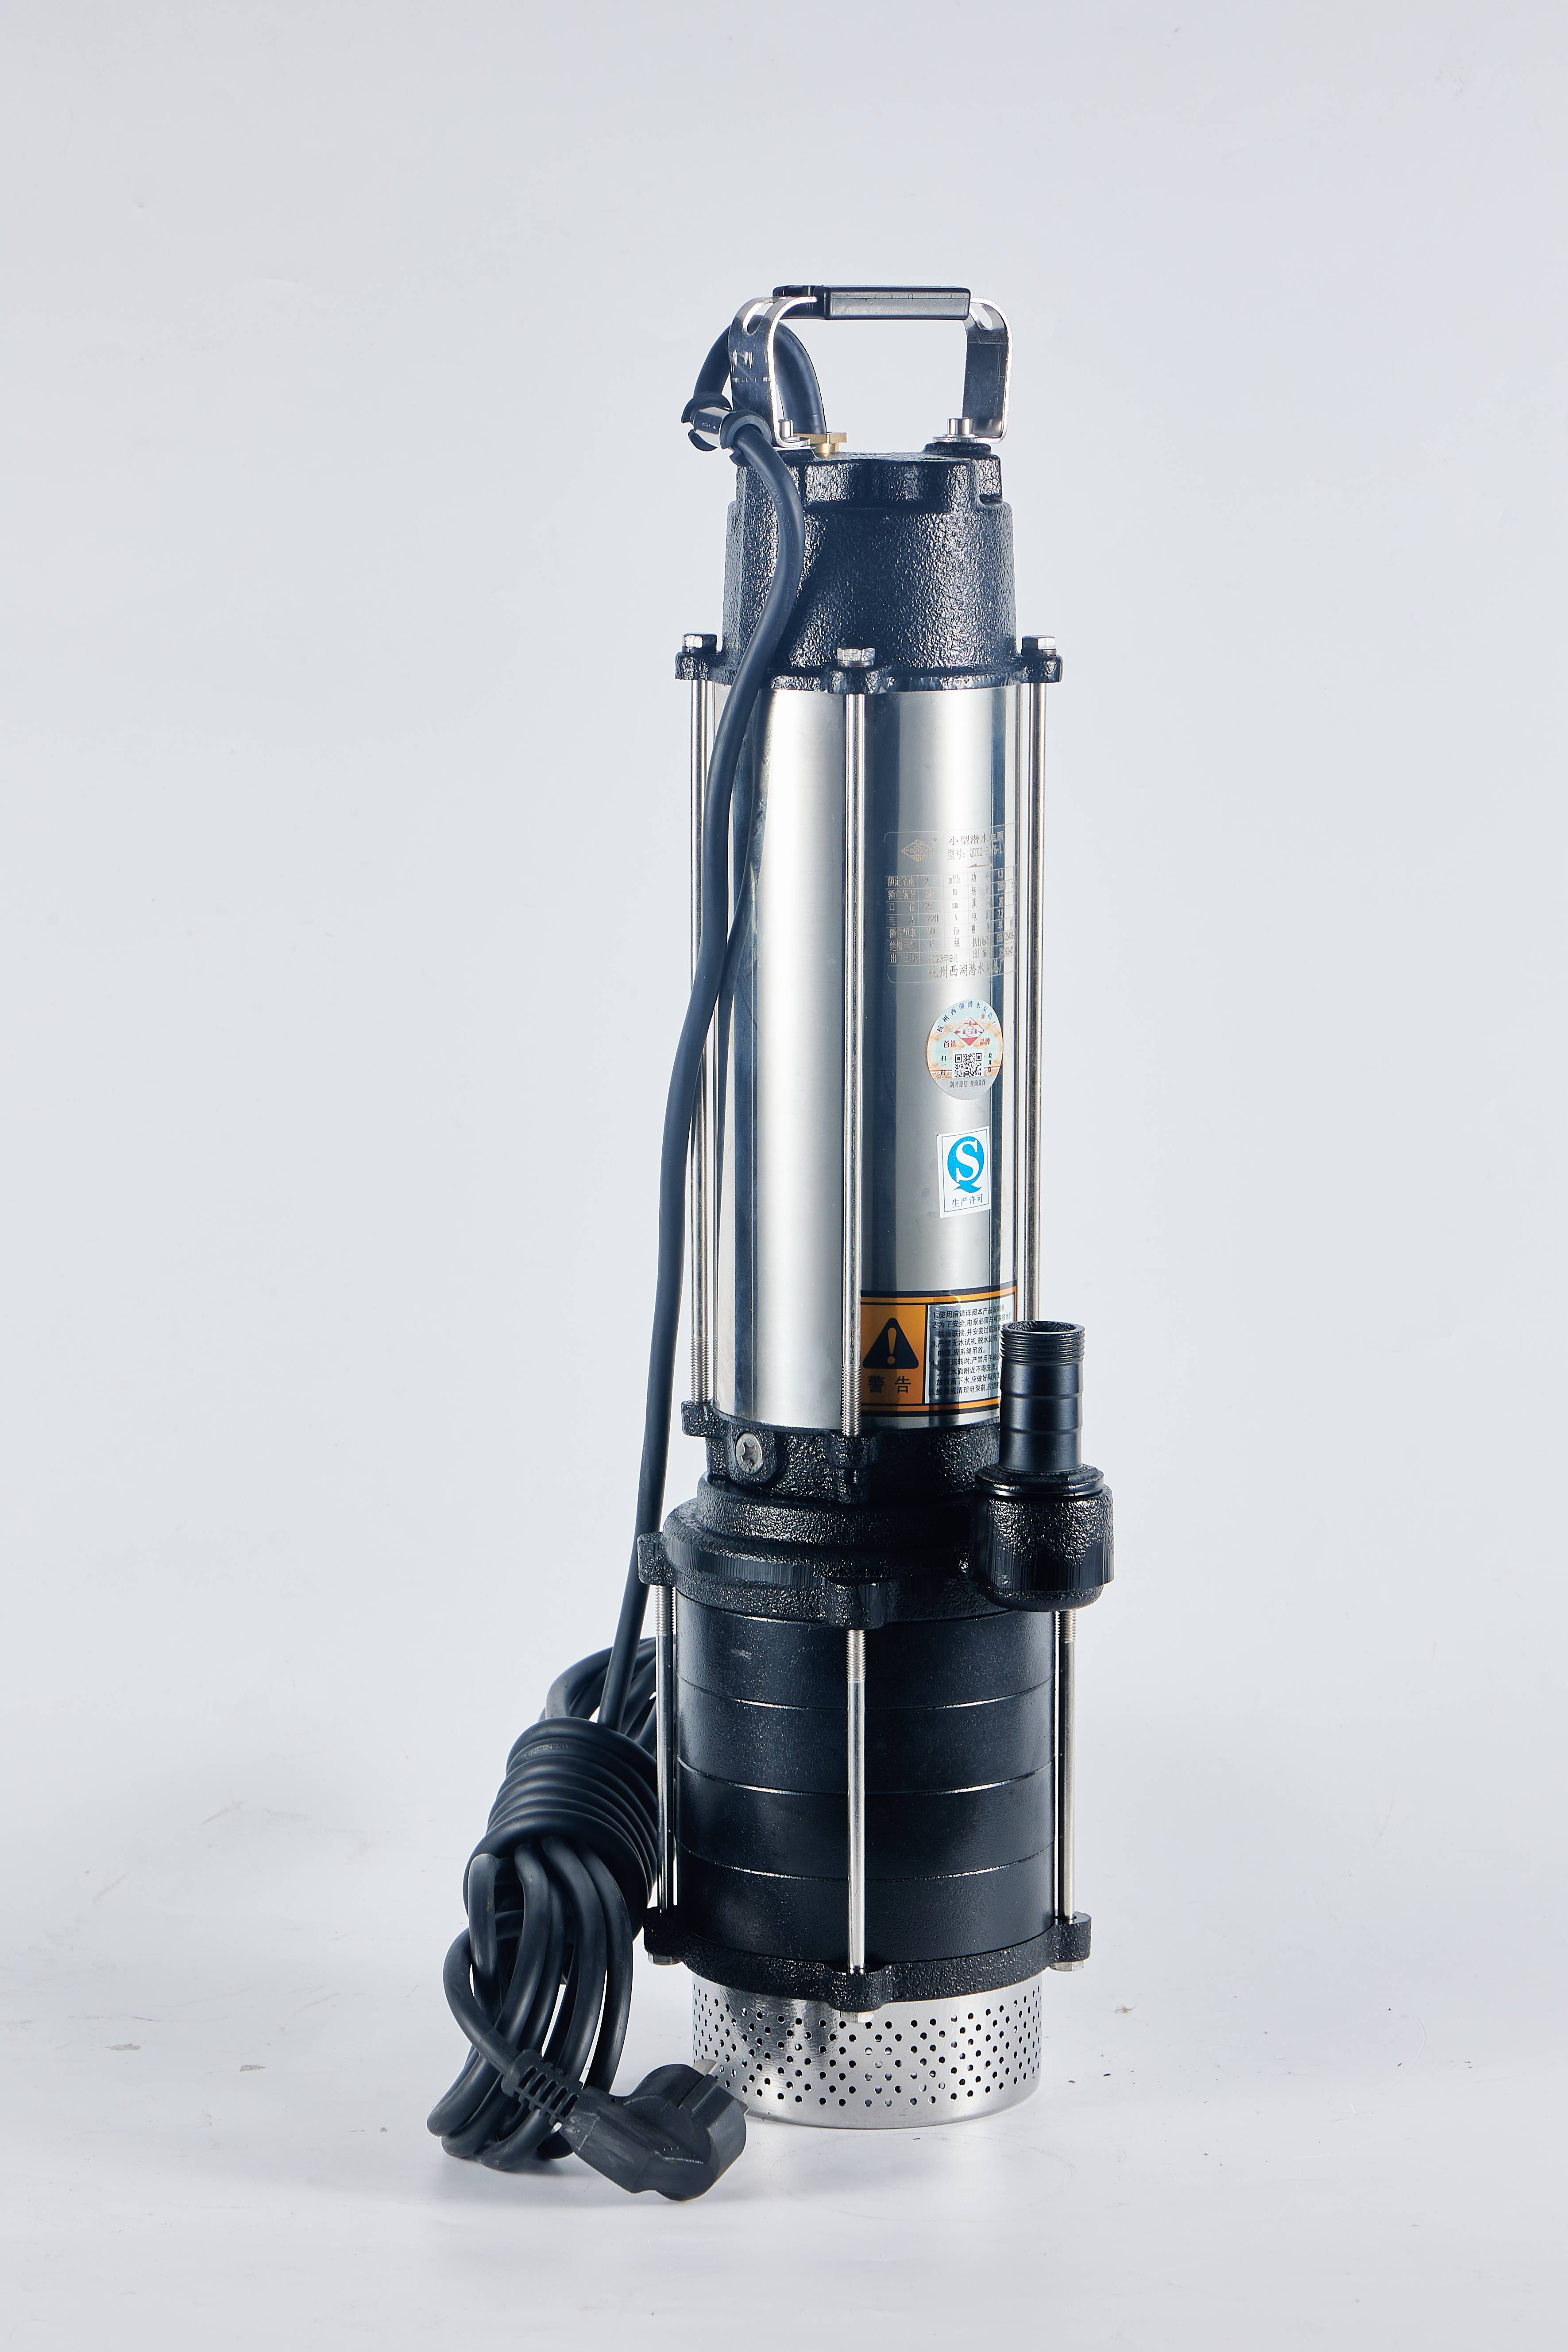 Cheap Wholesale Price Submersible Pumps with Float Switch China Factory Bulk Supply